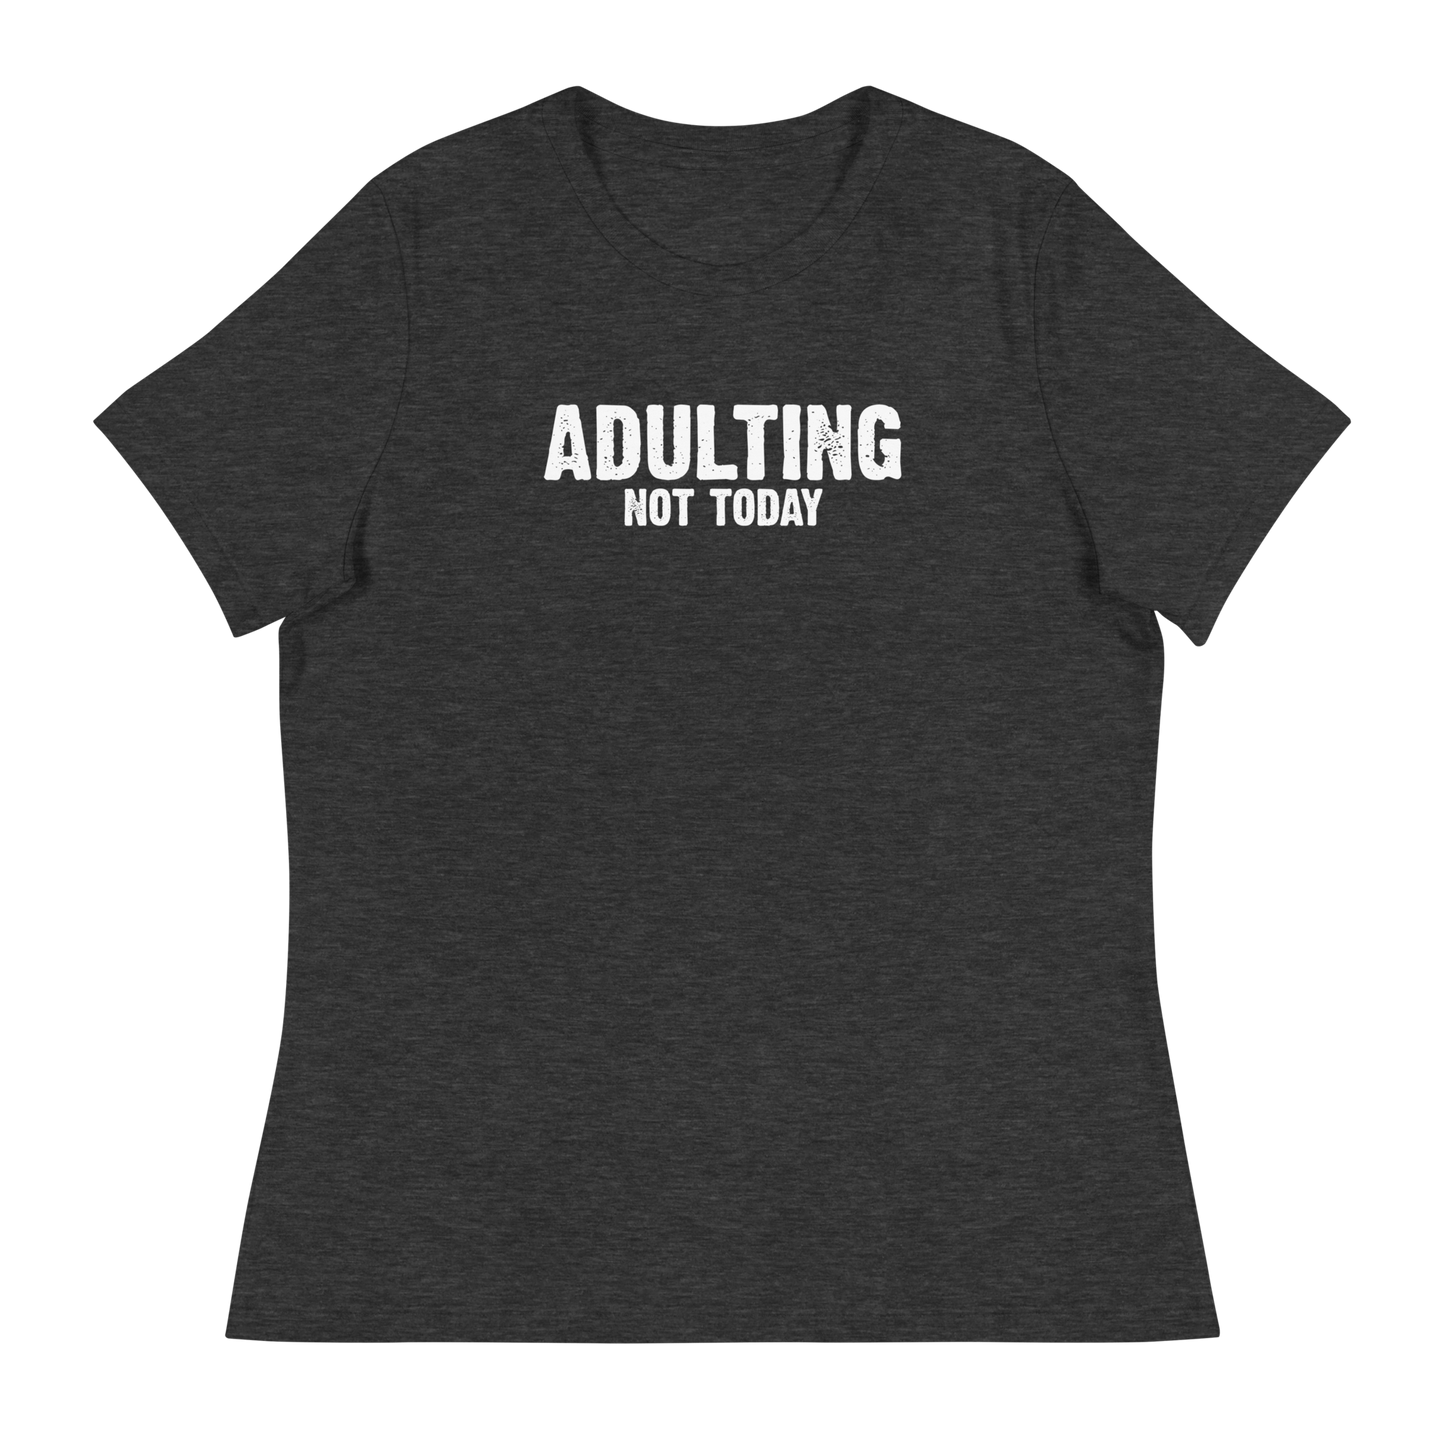 Women's - Adulting, Not Today - Funny T-Shirt